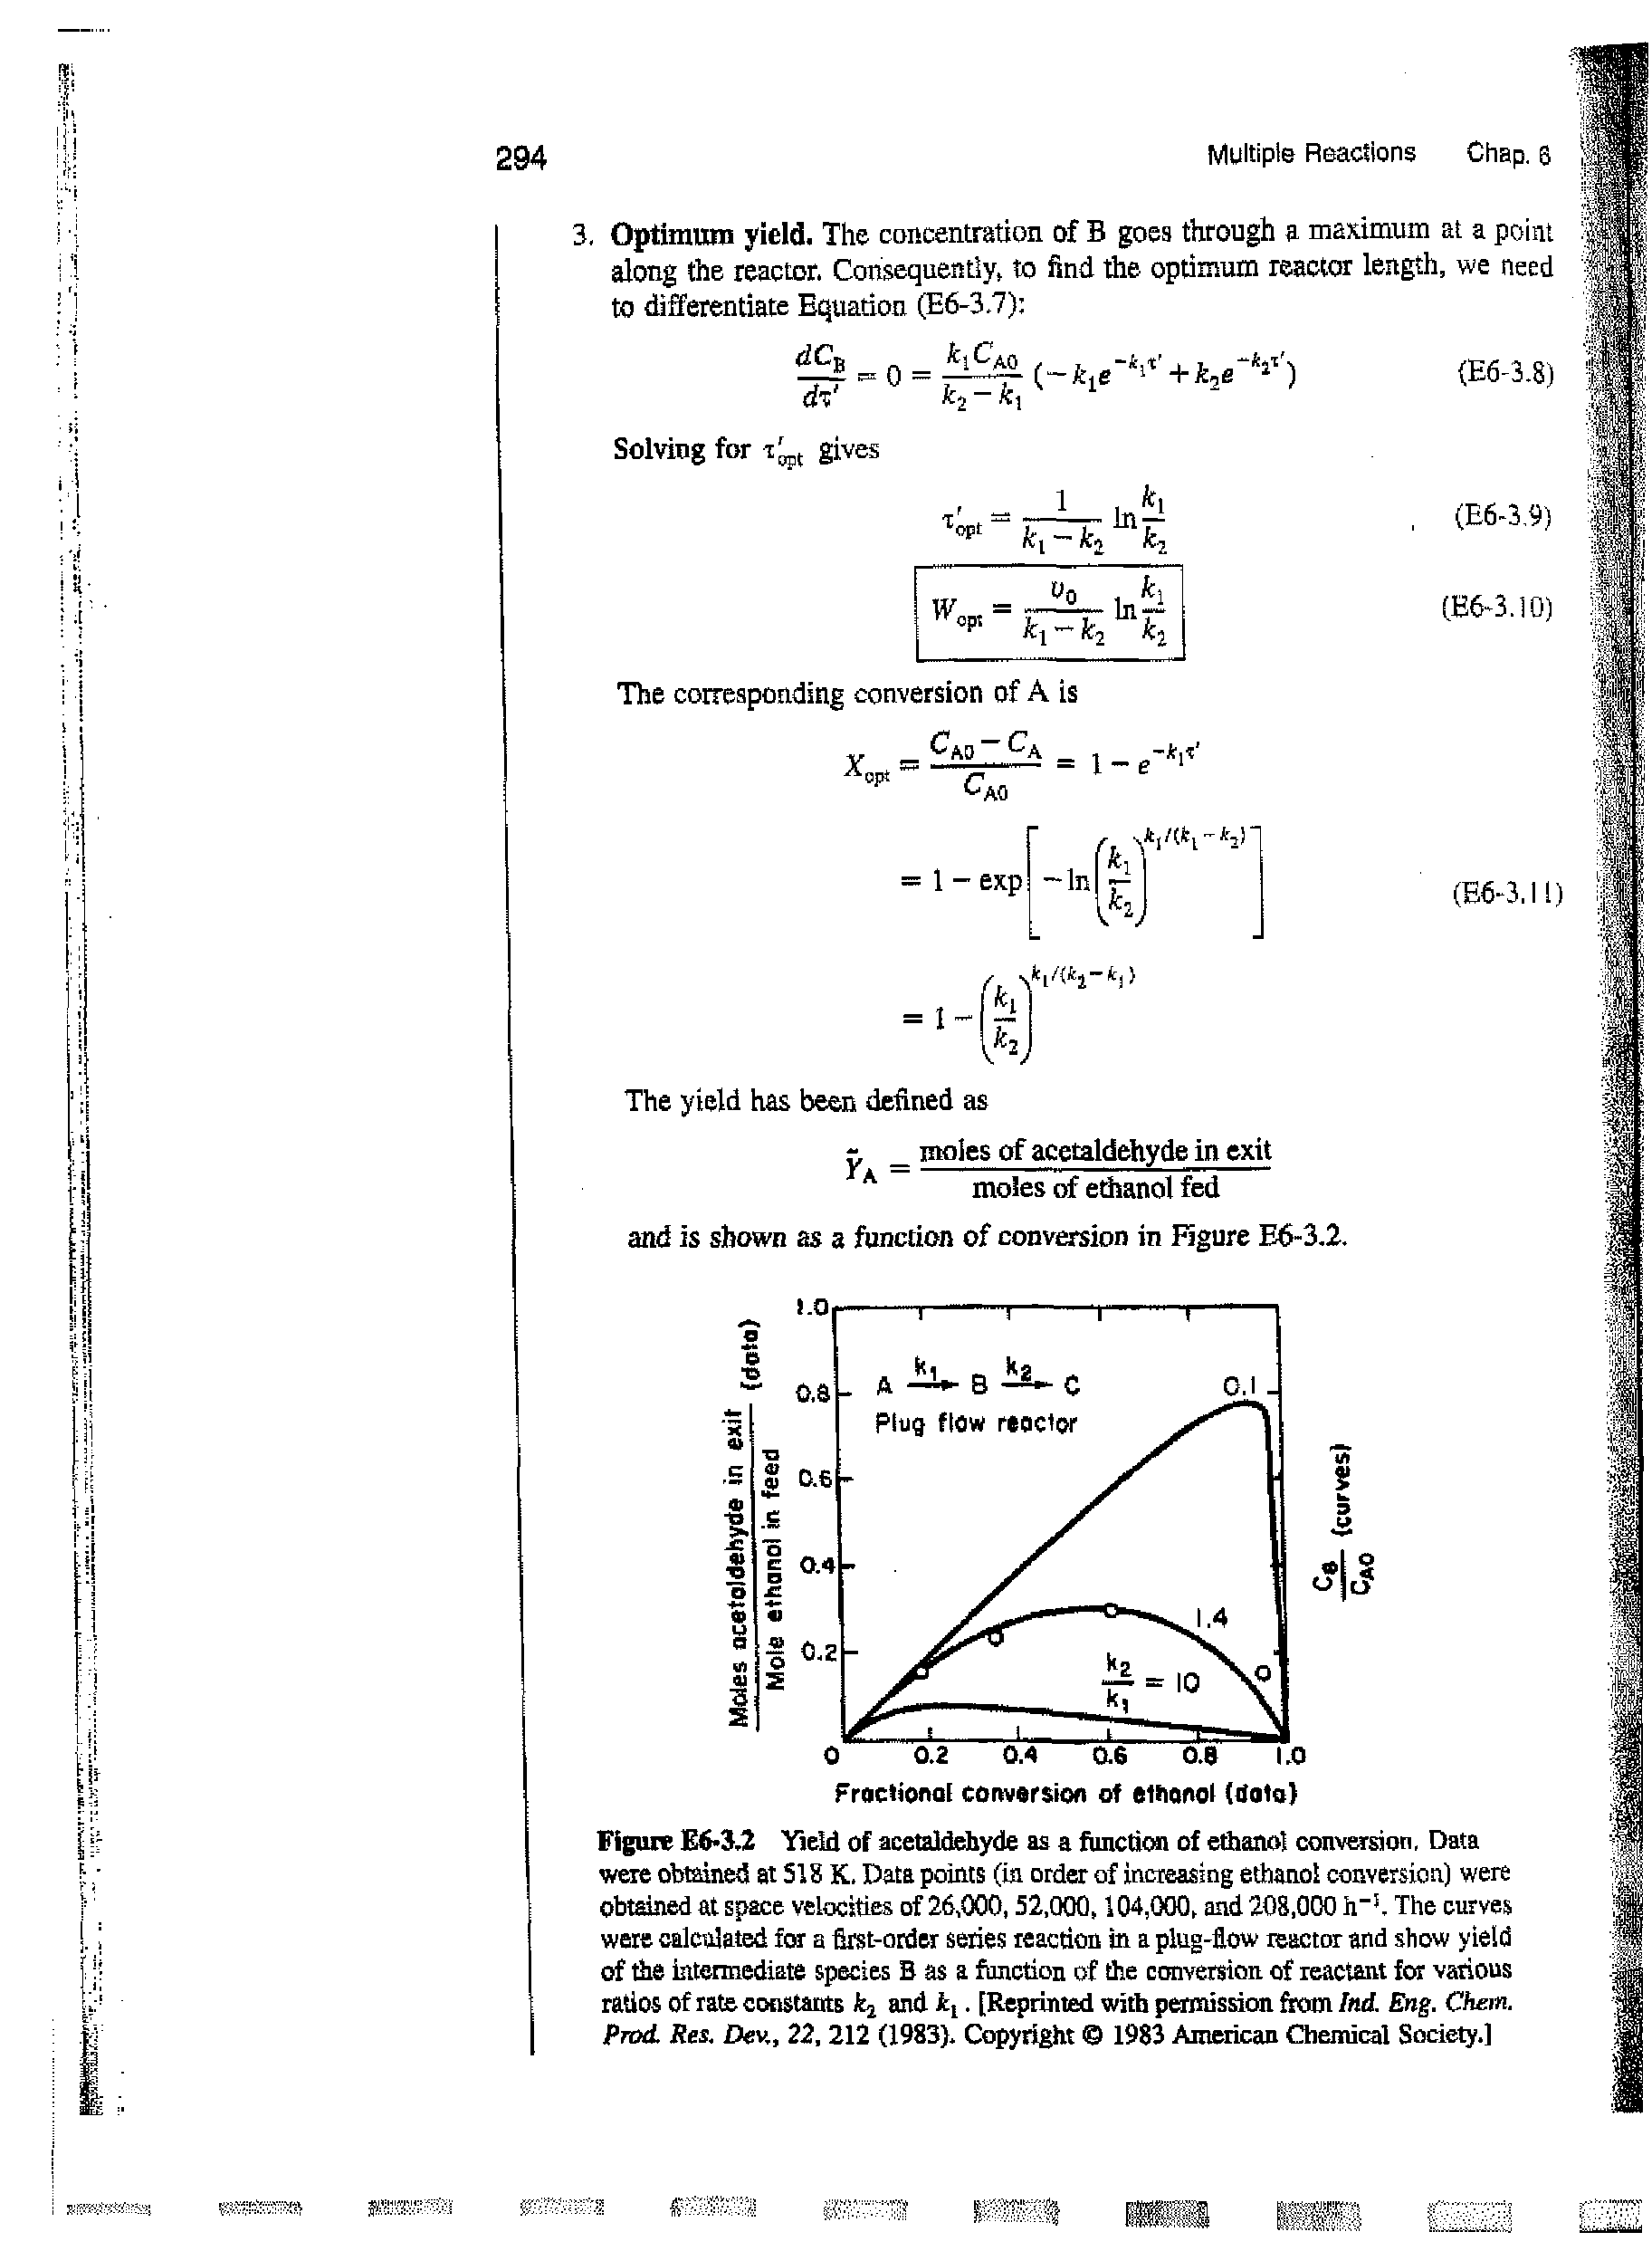 Figure 6-3.2 Yield of acetaldehyde as a function of ethanol conversion. Data were obtained at 518 K. Data points (in order of increasing ethano conversion) were obtained at space velocities of 26,000,52,000,104,000, and 208,000 h"h The curves were calculated for a first-order series reaction in a plug-flow reactor and show yield of the intermediate species B as a function of the conversion of reactant for various ratios of rate constants and. [Reprinted with permission fiom Ind. Eng. Chan. Prod. Res. Dev., 22, 212 (1983). Copyright 1983 American Chemical Society.]...